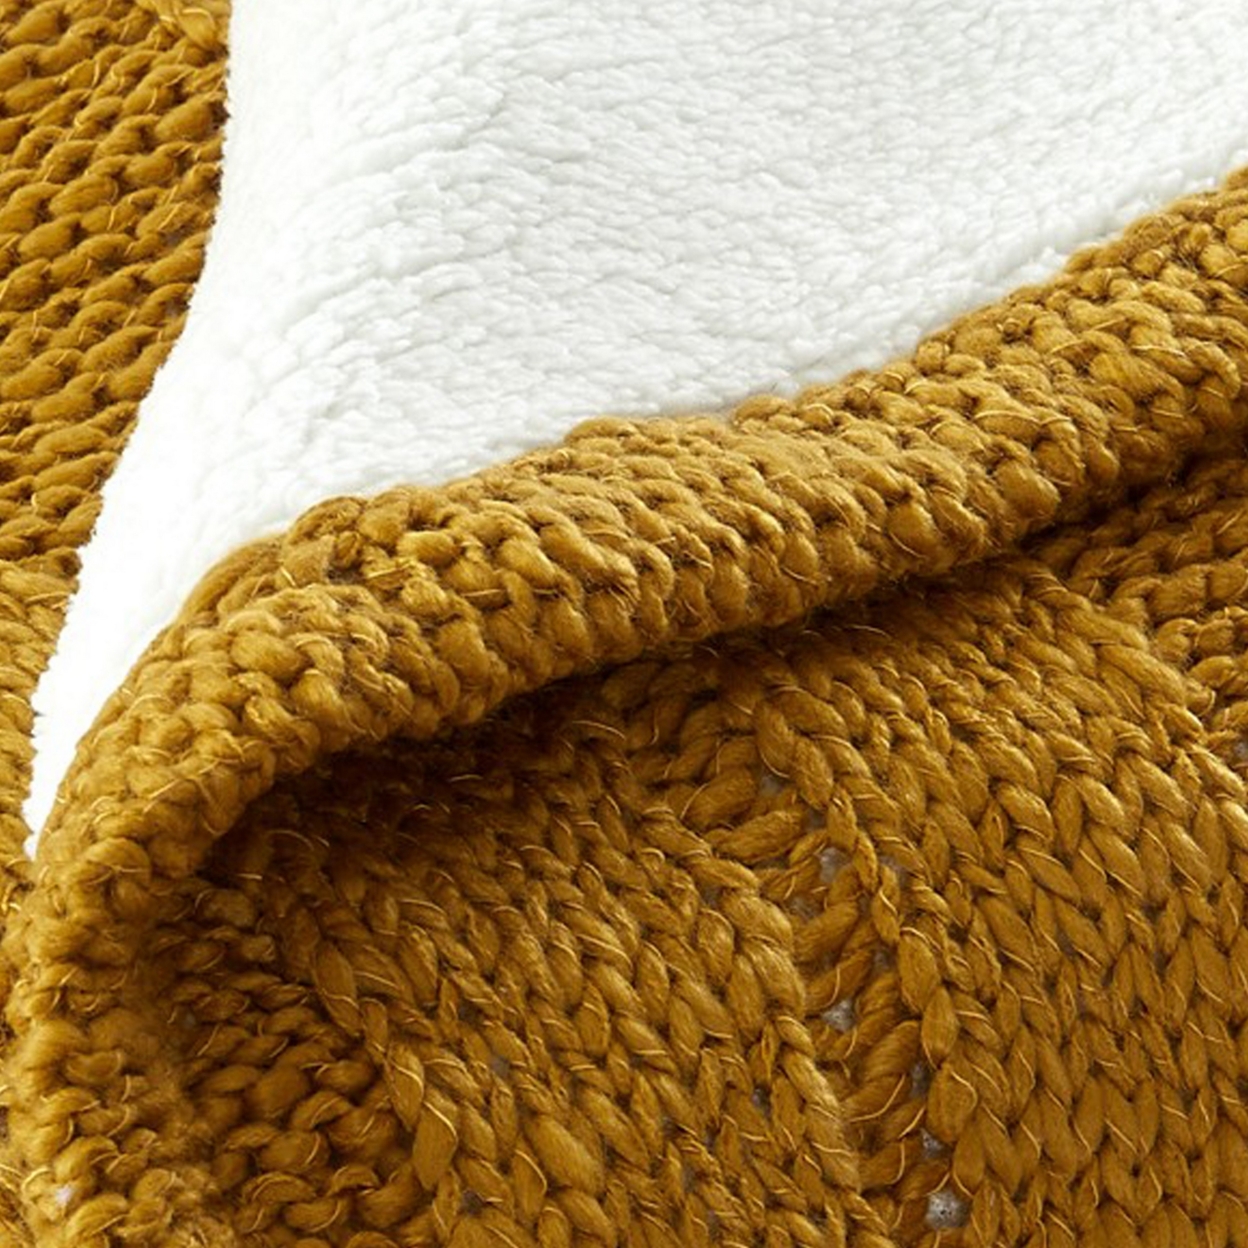 Lois 50 X 60 Throw Blanket With Cable Knit And Sherpa, Acrylic, Gold, White- Saltoro Sherpi